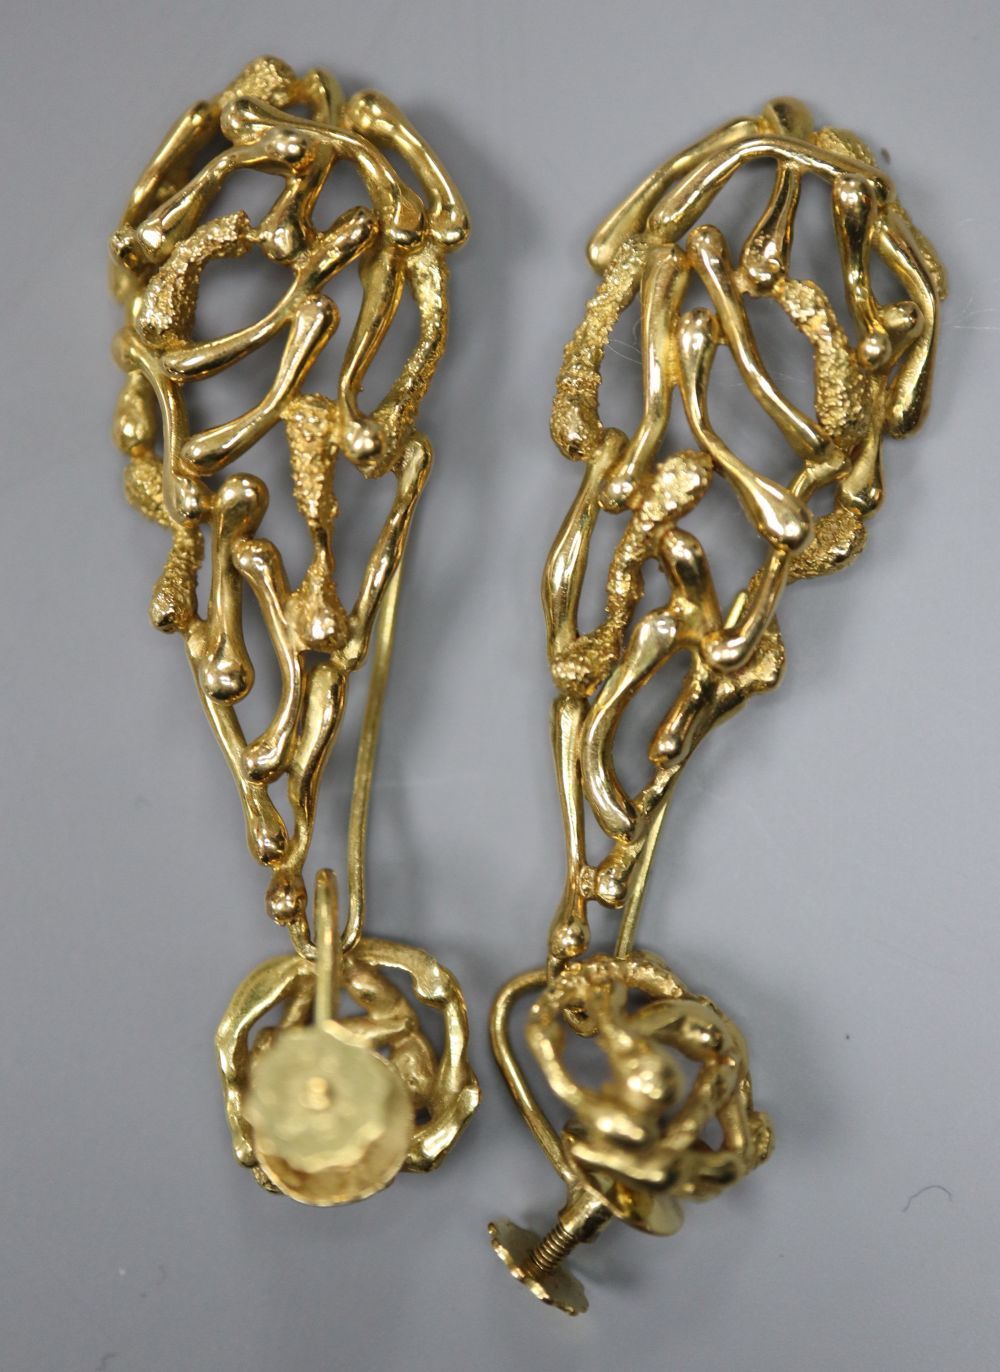 A pair of 18ct yellow modernist earrings of openwork 'branch' design, with screw-back fittings and